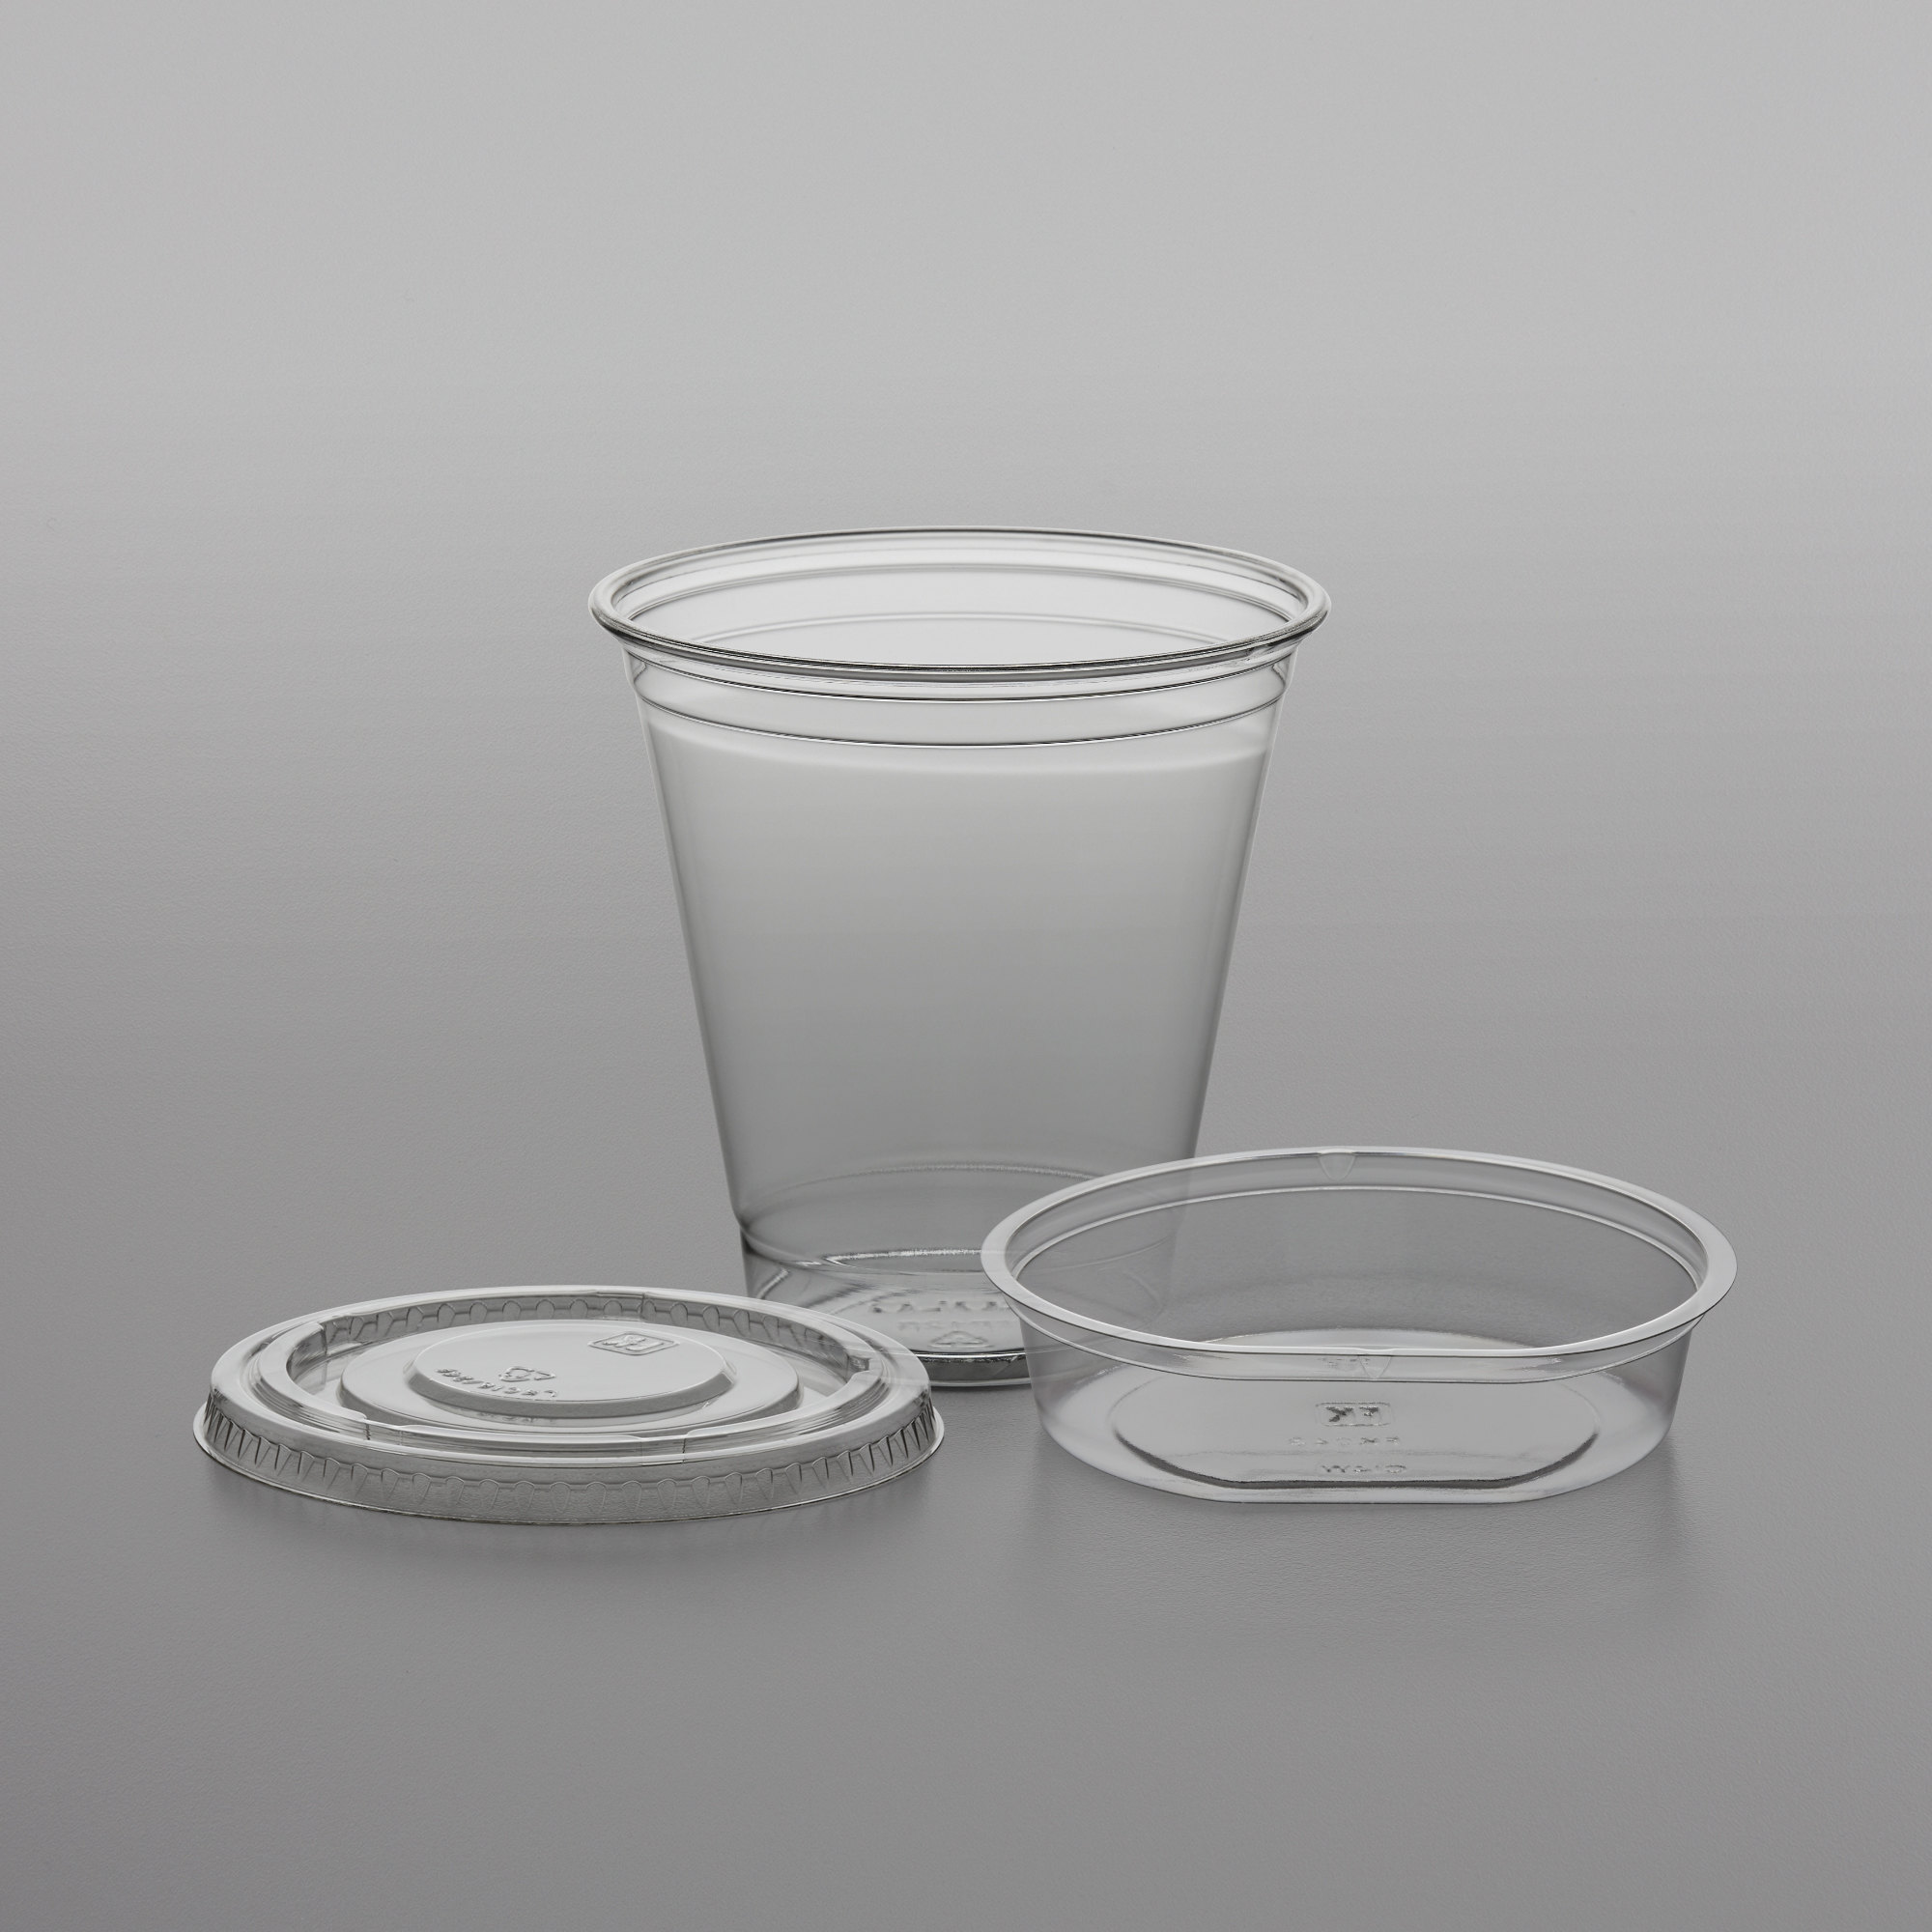 Fabri-Kal Greenware 12 oz. Compostable Clear Plastic Parfait Cup with 4 oz.  Insert and Flat and Dome Lids - 100/Pack